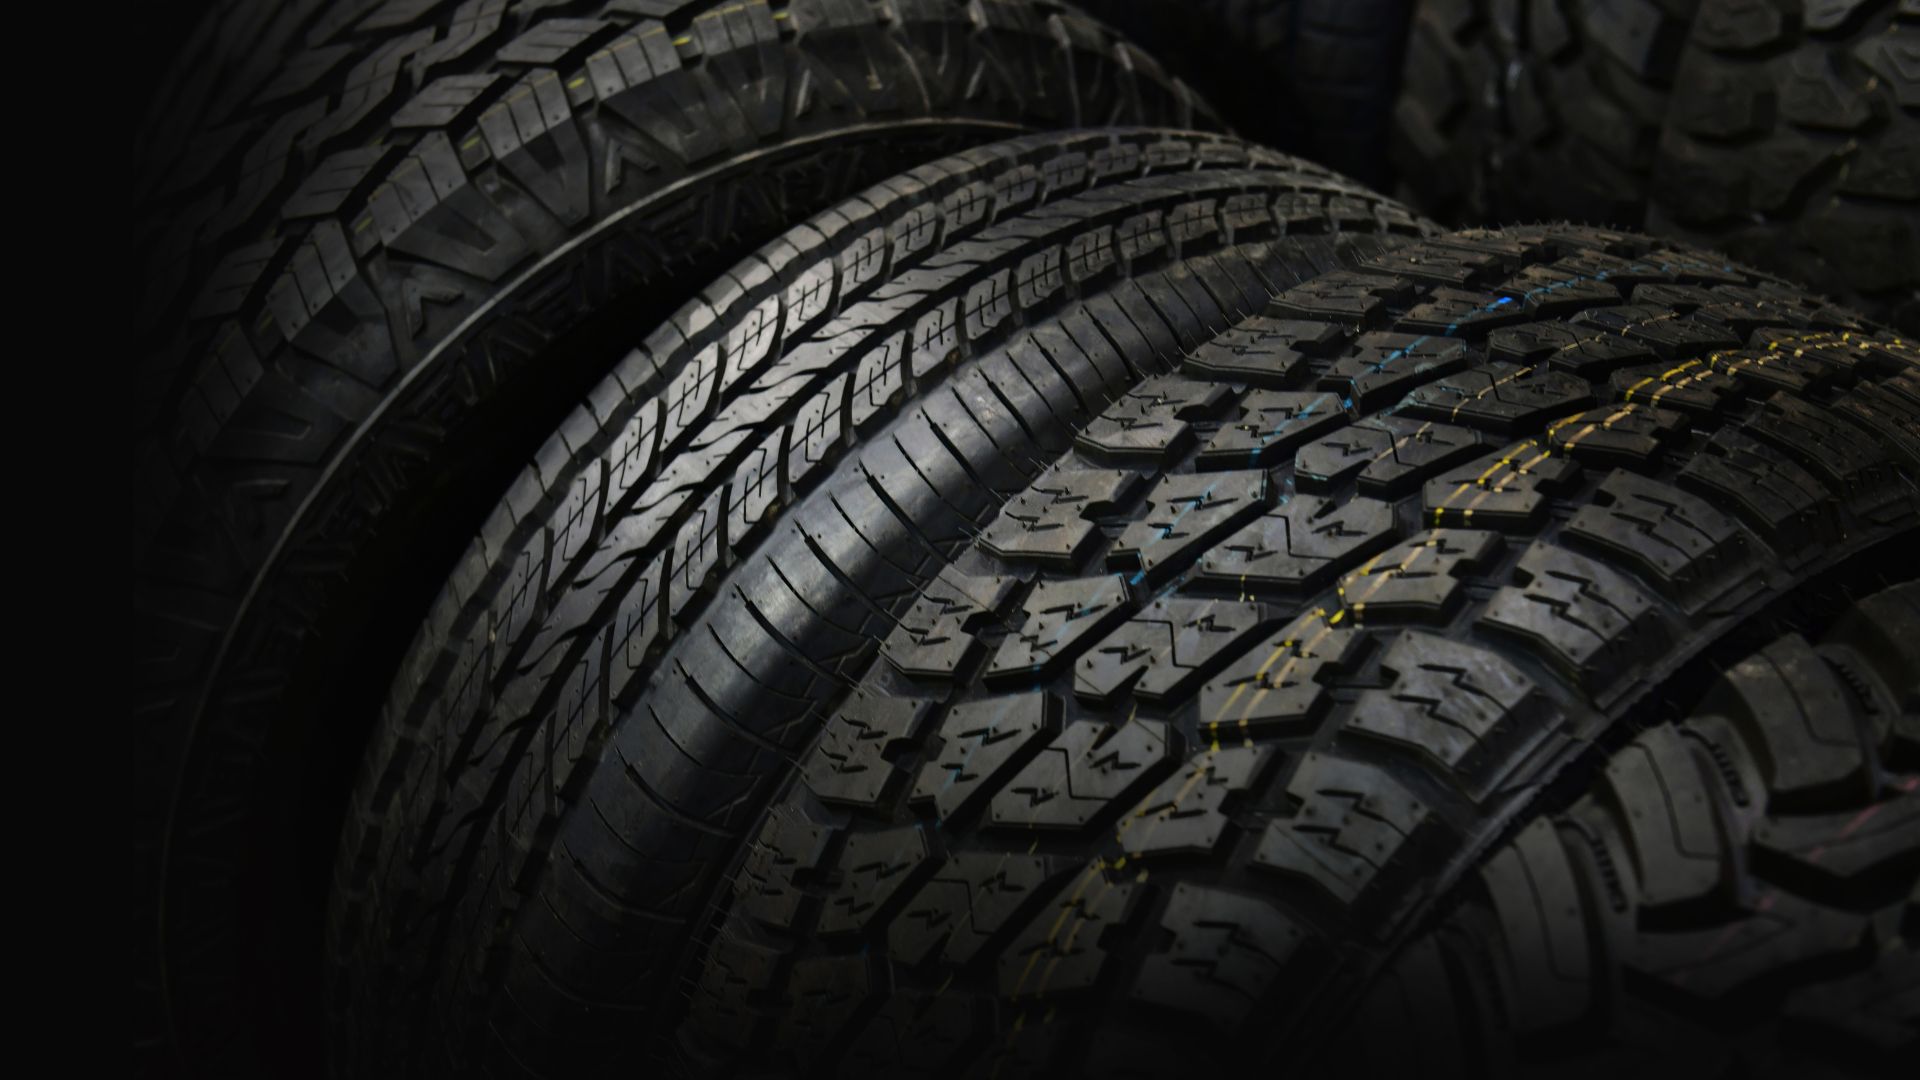 Understanding the Purpose of Tiny Rubber Hairs on Tires